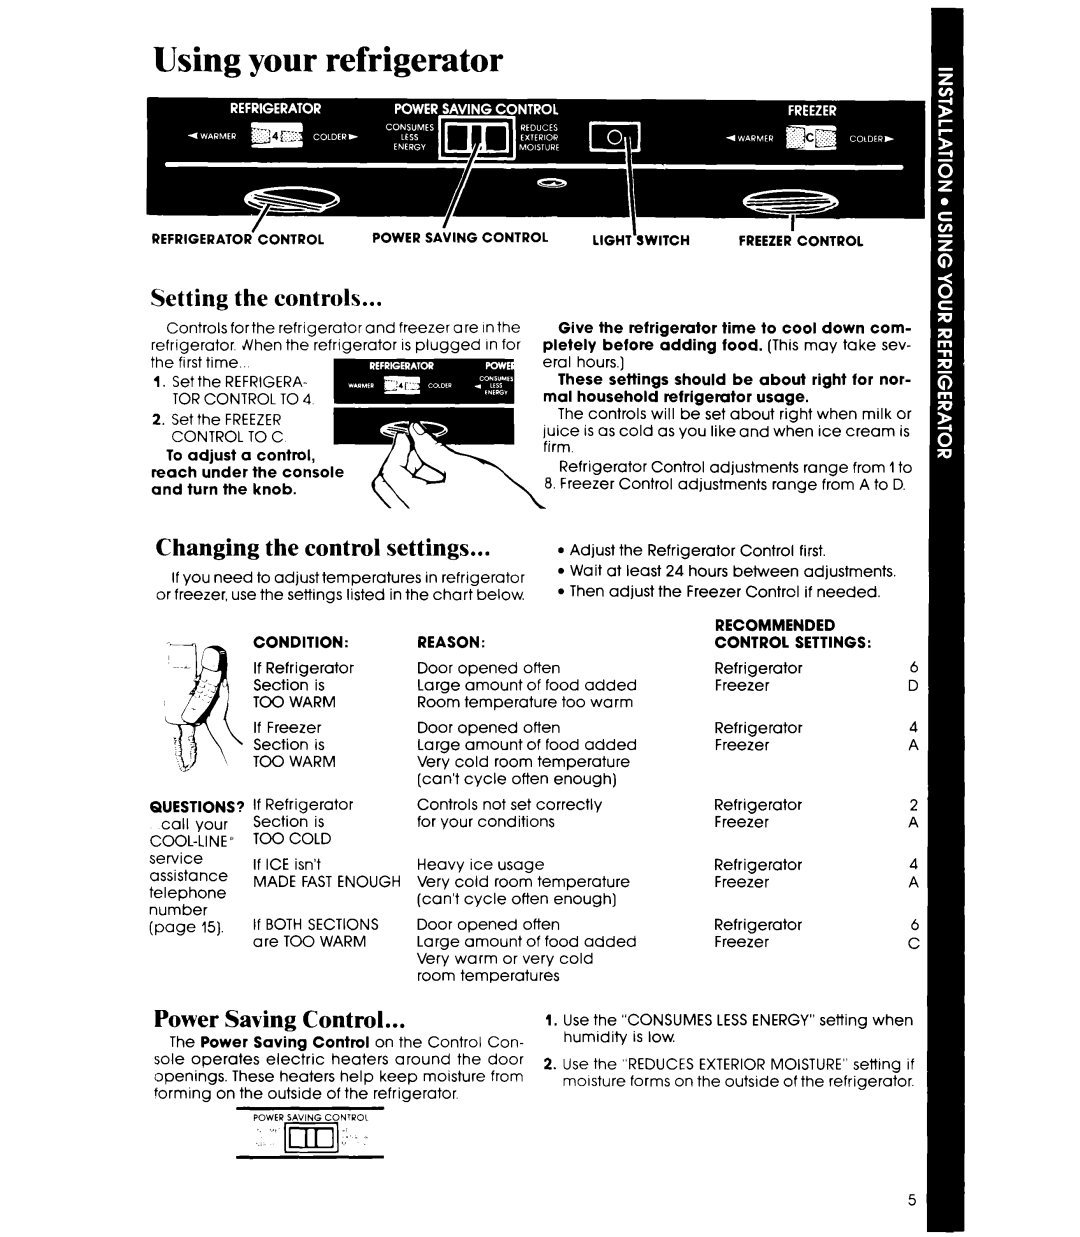 Whirlpool ET20AK manual Using your refrigerator, Setting the controls, Changing the control settings, Power Saving Control 